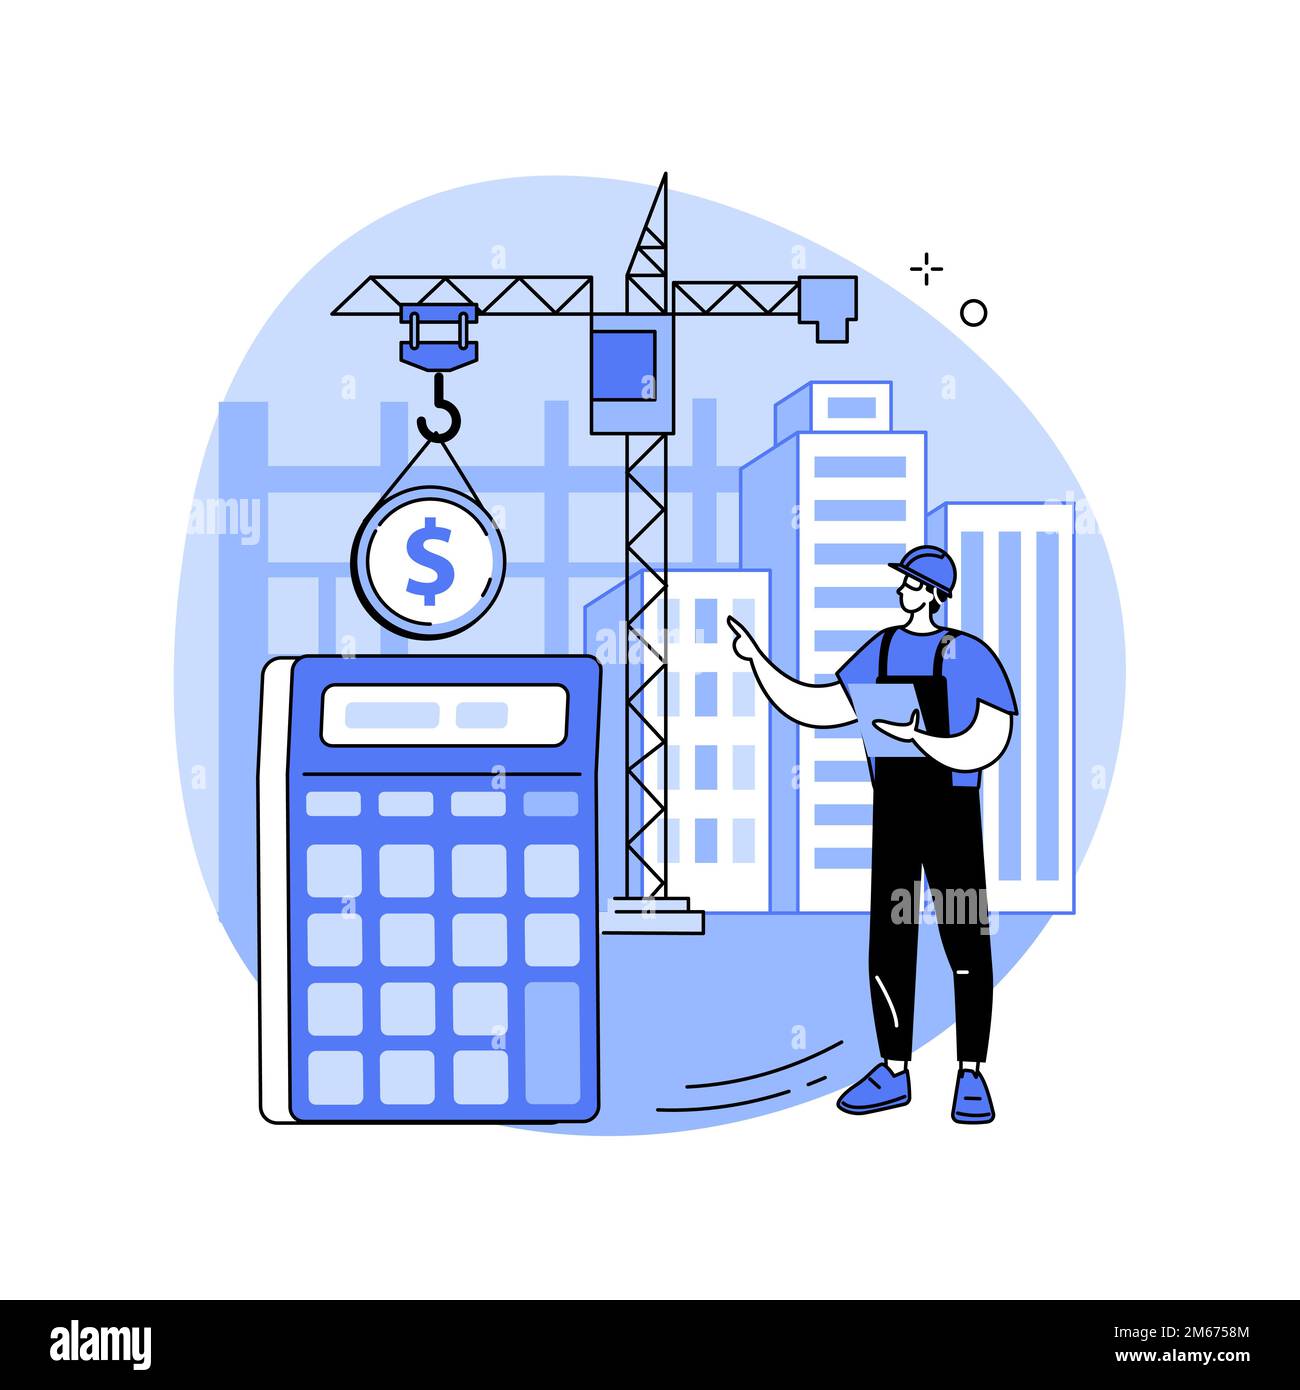 Construction costs abstract concept vector illustration. Project management, bank loan, real estate business, design project, building investment, con Stock Vector